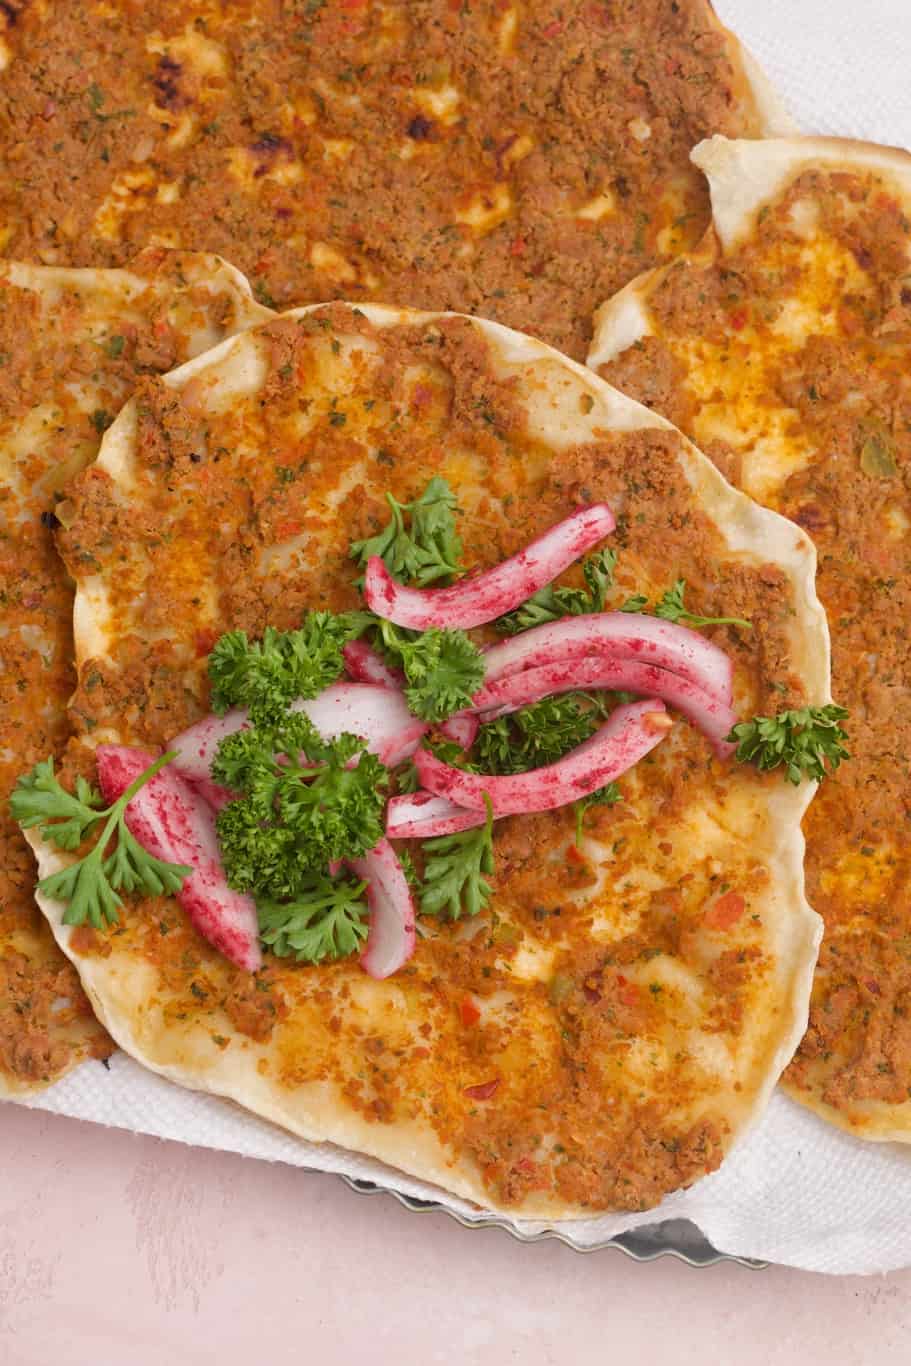 spicy lahmajun wraps garnished with onions and fresh herbs